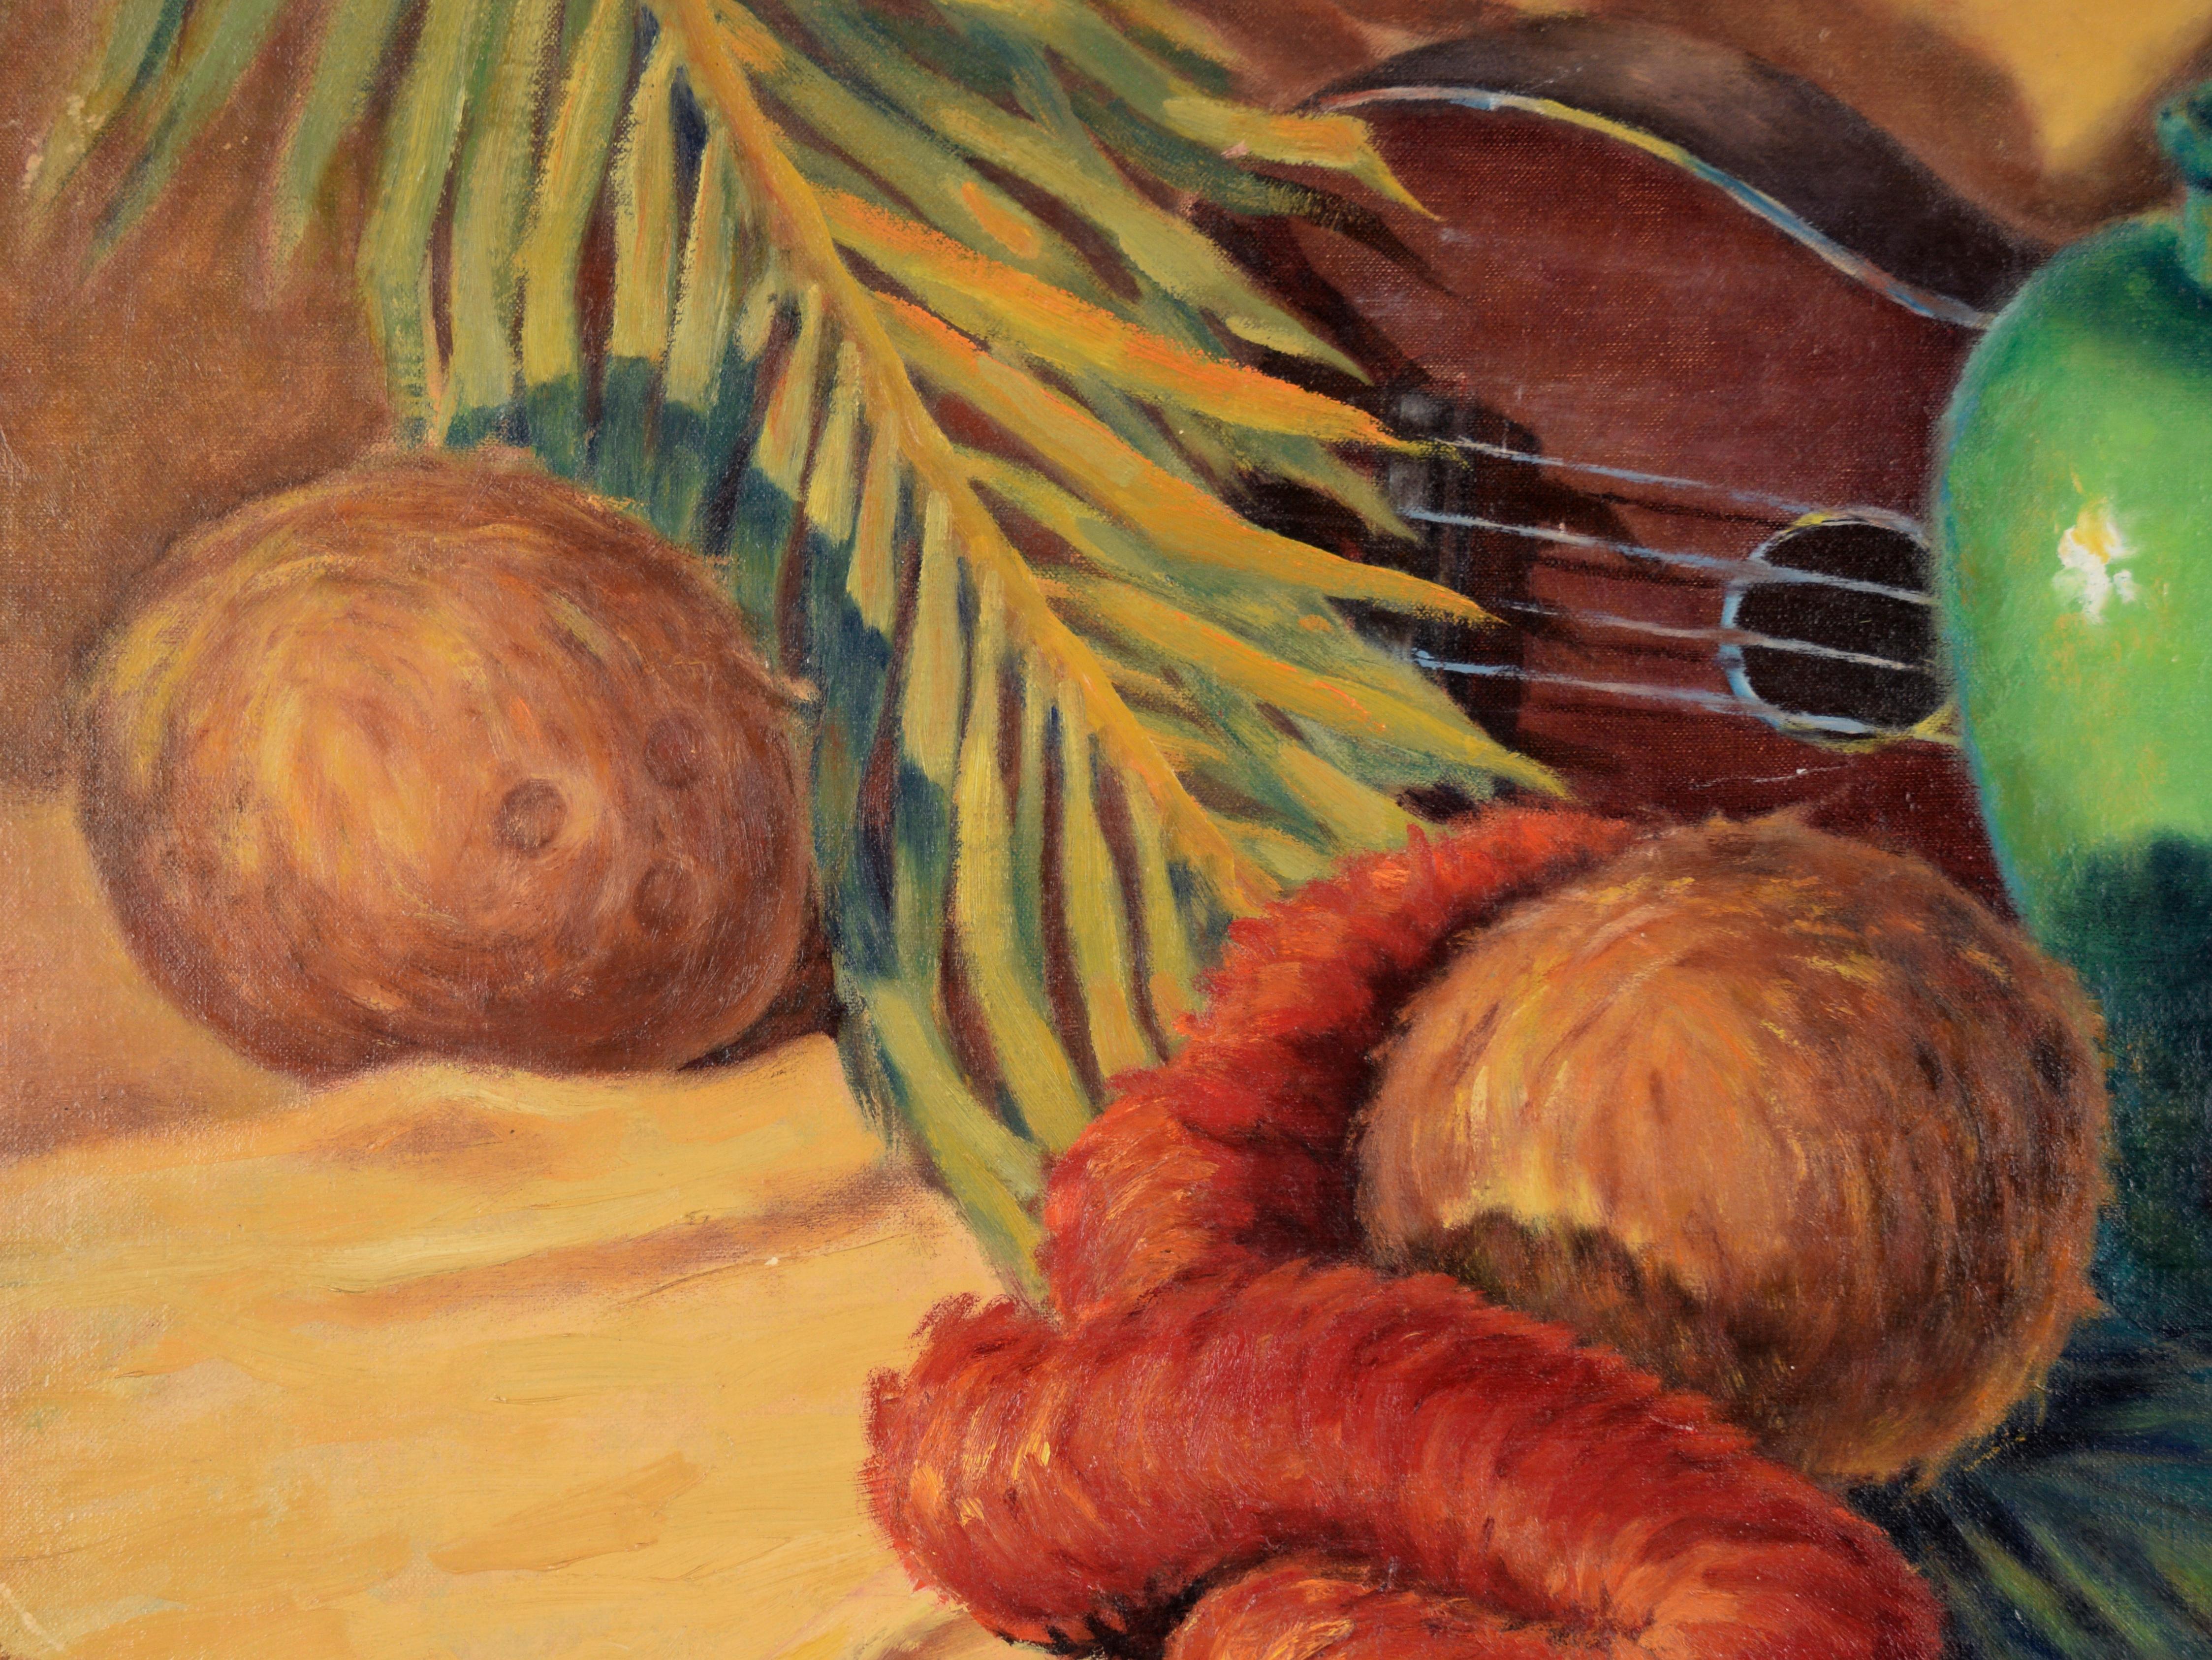 Tropical Still Life with Green Pot and Ukulele in Oil on Canvas

Vibrant still life by Santa Cruz County artist N. Weber (20th Century). There are several tropical items in this composition - coconuts, bananas, a lei, palm frond, and ukulele. There